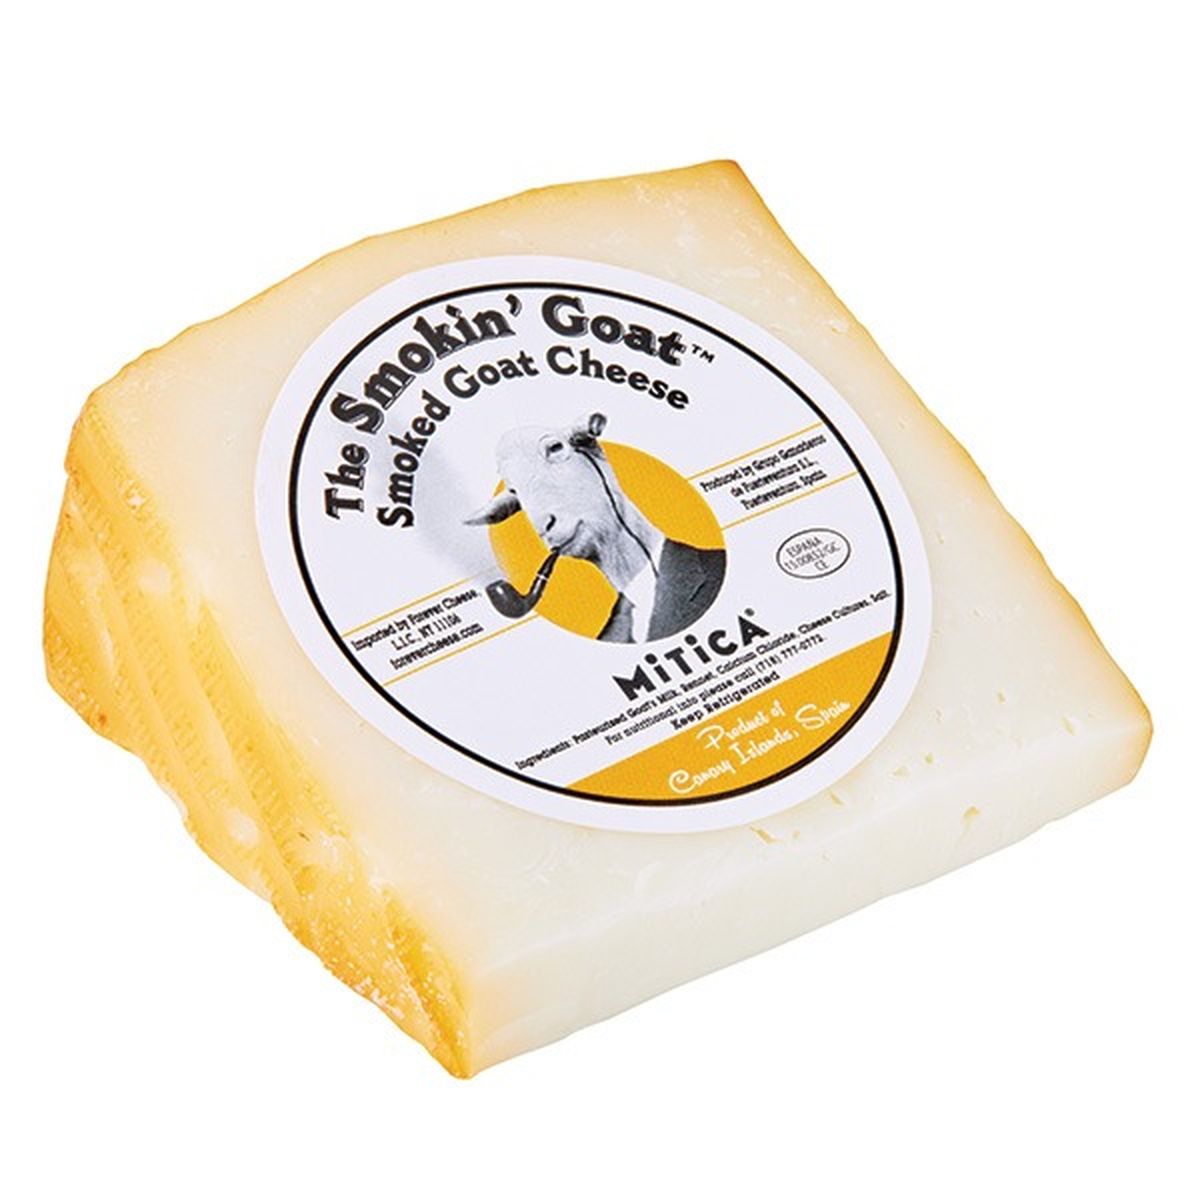 Calories in Forever Cheese Smokin Goat